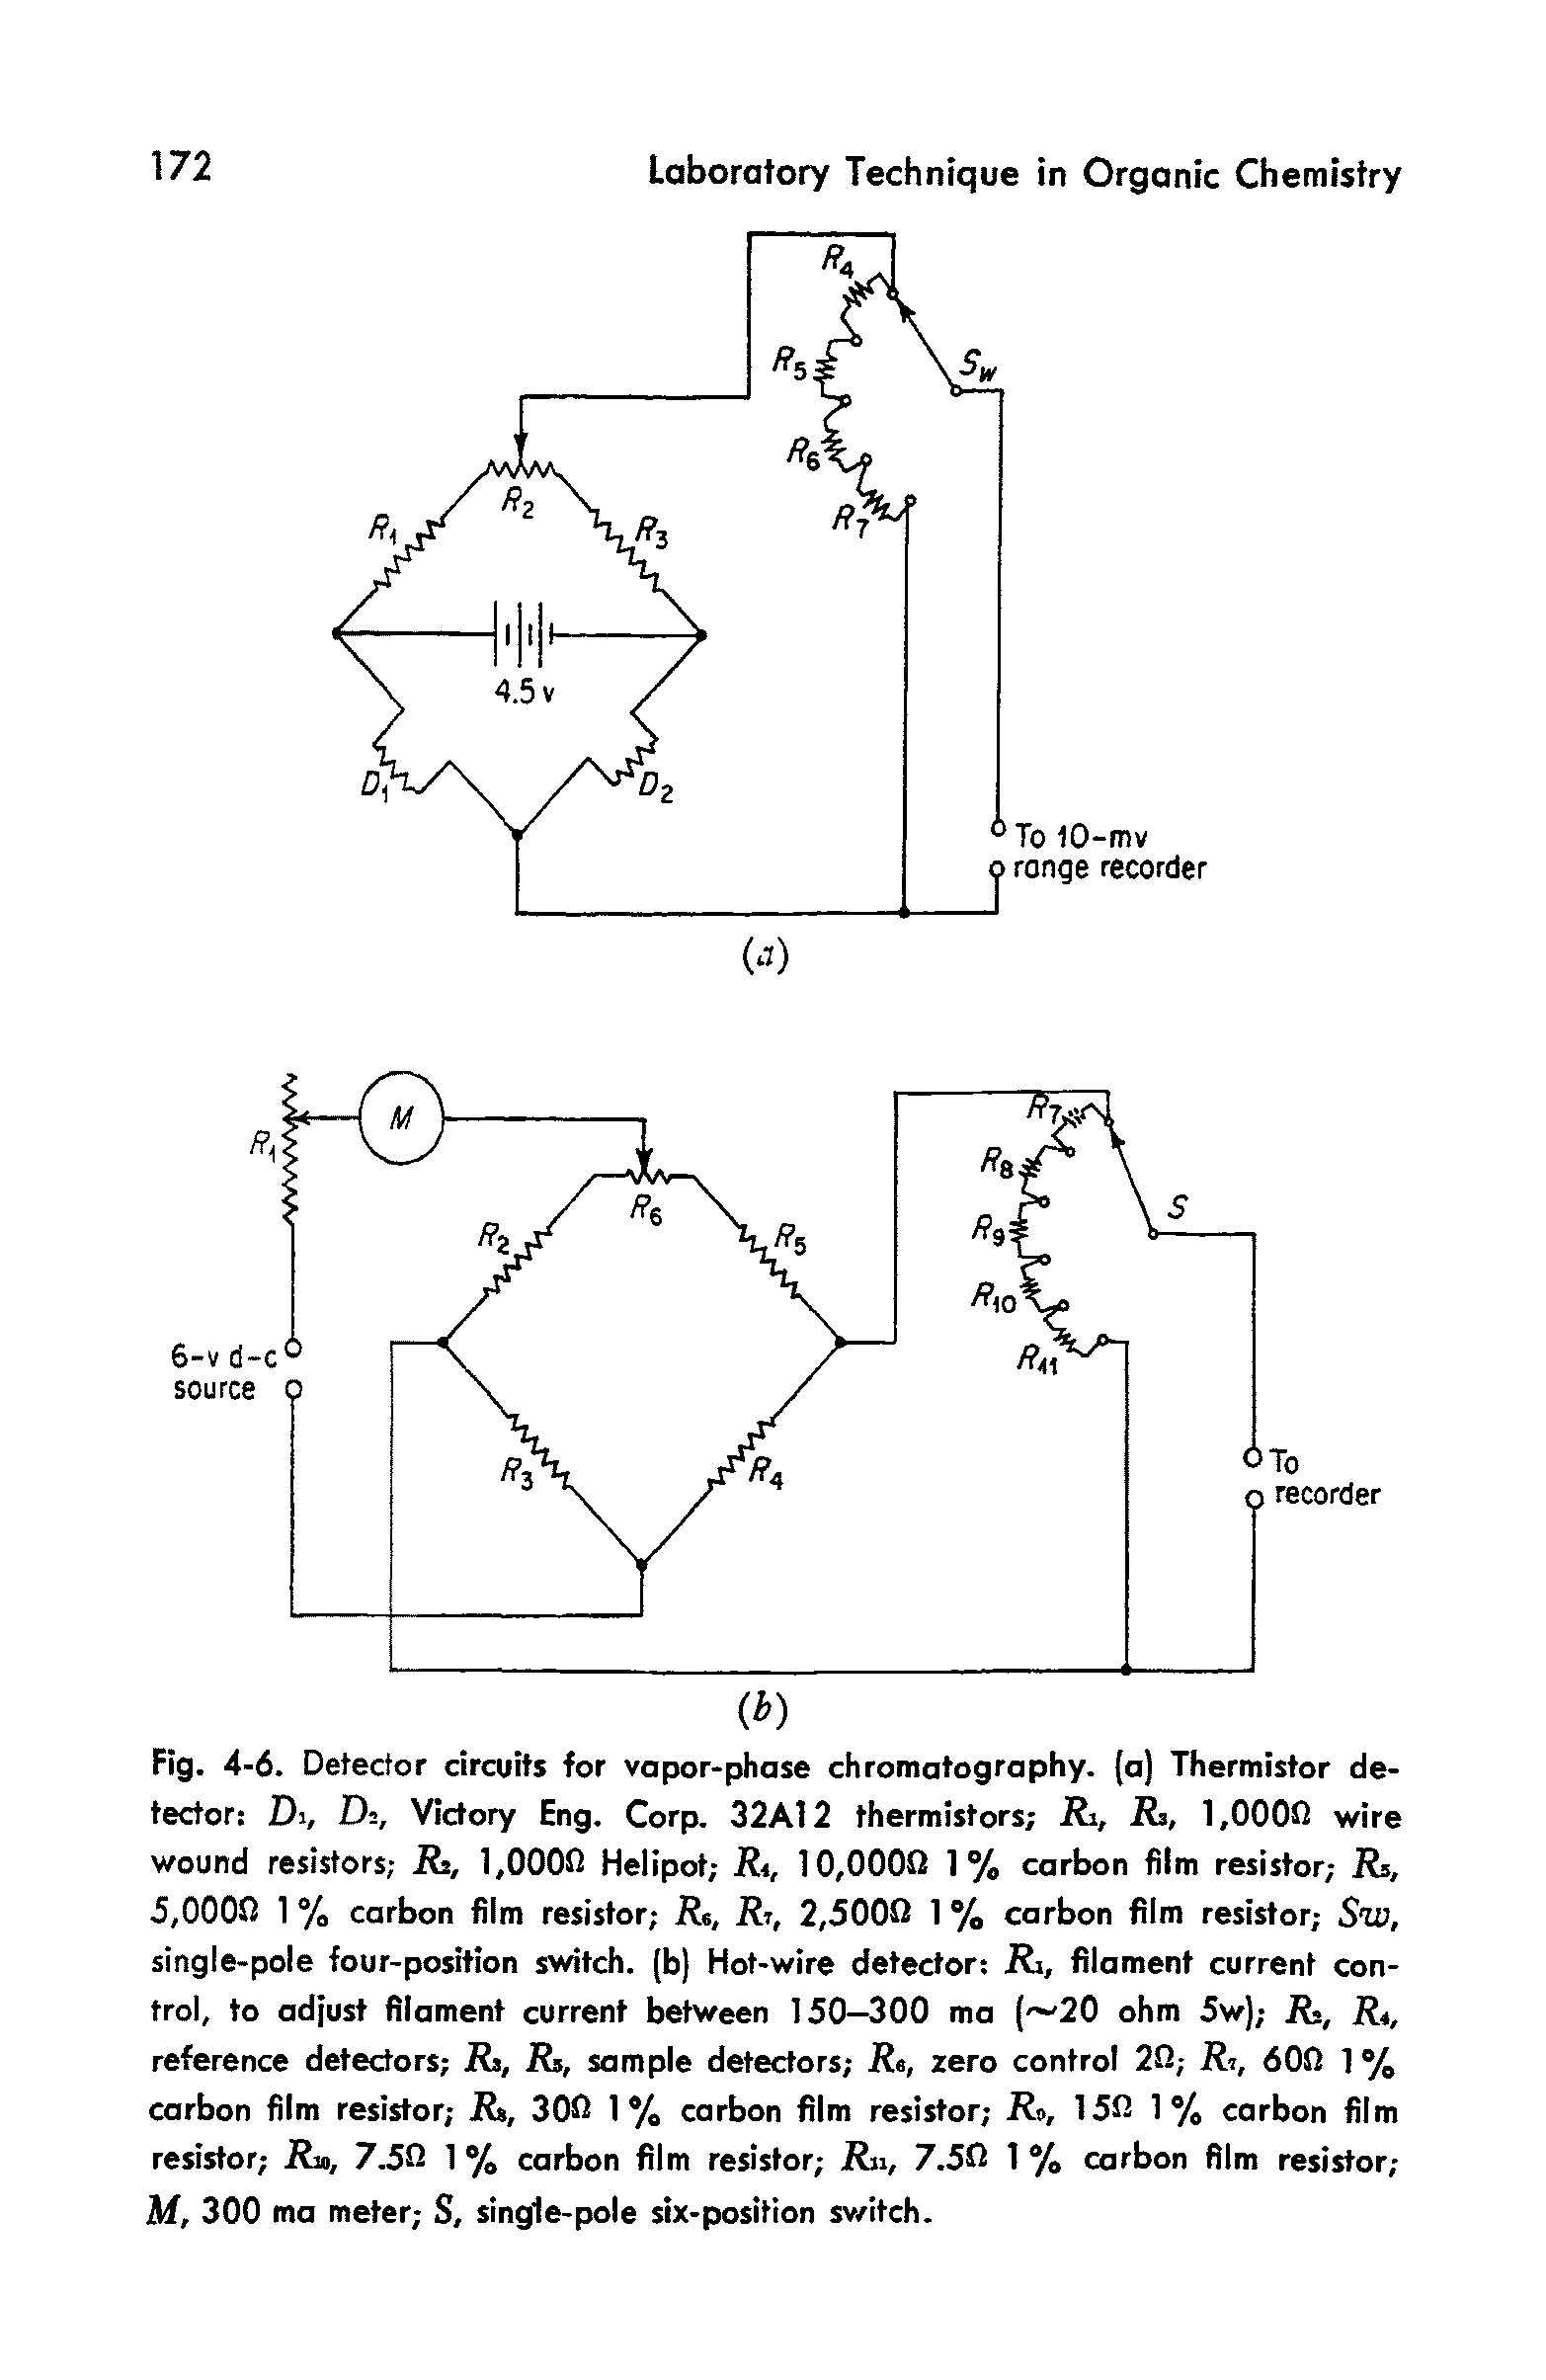 Fig. 4-6. Detector circuits for vapor-phase chromatography, (a) Thermistor detector Di, D=, Victory Eng. Corp. 32A12 thermistors Ri, Ri, 1,0000 wire wound resistors Rz, 1,0000 Helipot Rt, 10,0000 1% carbon film resistor Rs, 5,0000 1 % carbon film resistor Rt, Rj, 2,5000 1 % carbon film resistor Sw, single-pole four-position switch, (b) Hot-wire detector Rz, filament current control, to adjust filament current between 150—300 ma ( 20 ohm 5w) Ri, R4, reference detectors Rs, R, sample detectors Re, zero control 20 Re, 600 1 % carbon film resistor R, 300 1 /, carbon film resistor R, 150 1% carbon film resistor Rse, 7.5Q 1 % carbon film resistor Rs, 7.SCI 1 % carbon film resistor M, 300 ma meter,- S, single-pole six-position sv/itch.